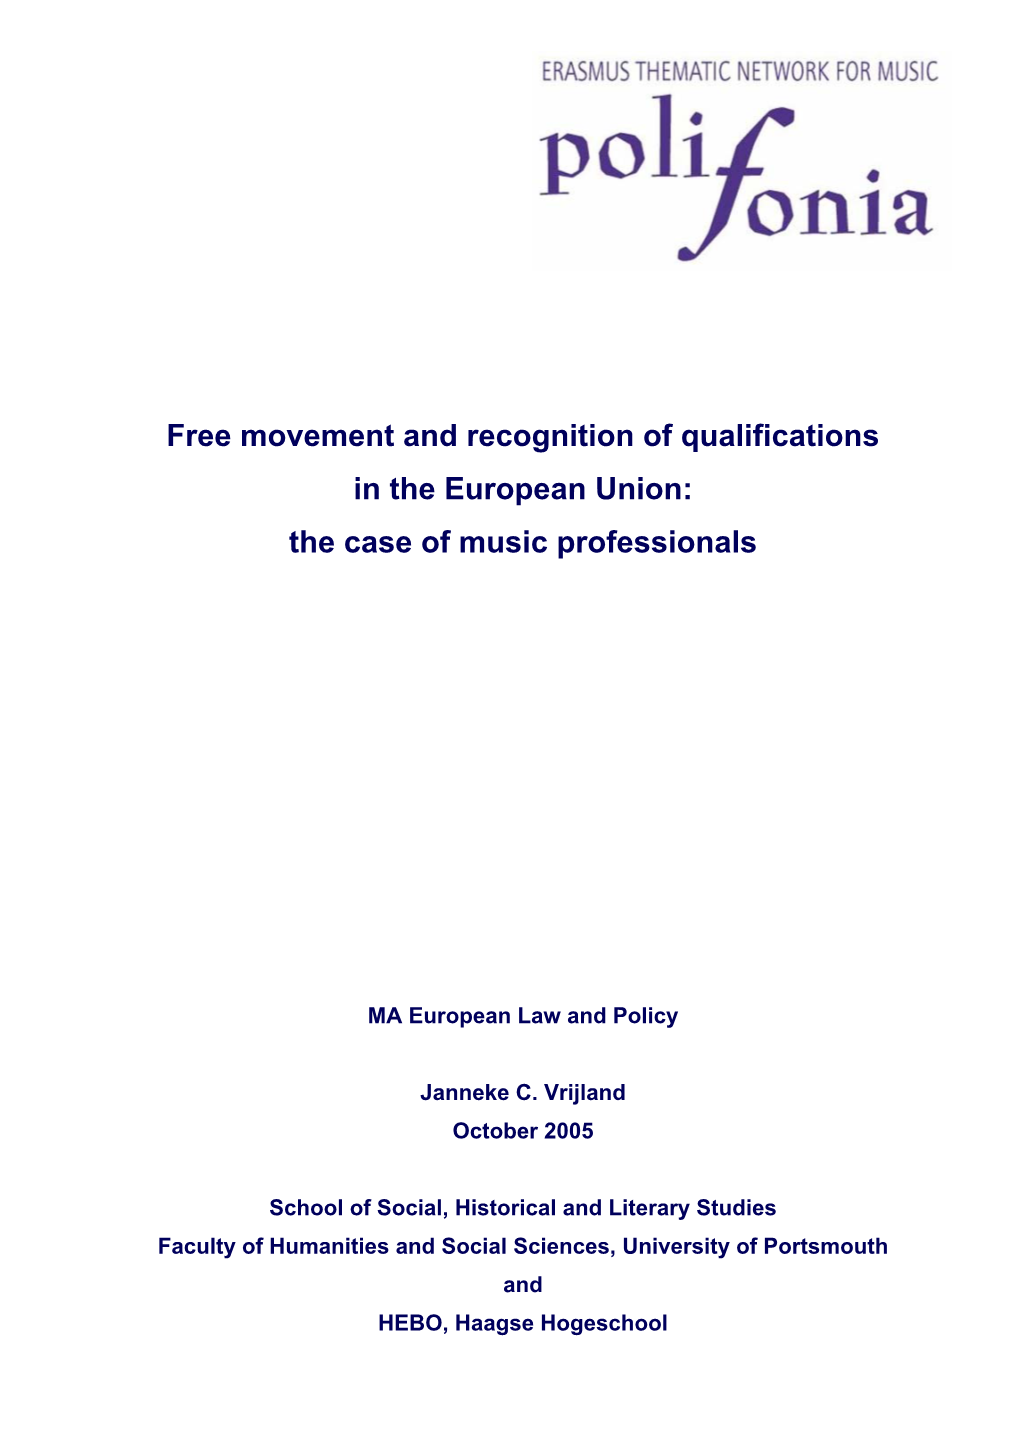 Free Movement and Recognition of Qualifications in the European Union: the Case of Music Professionals